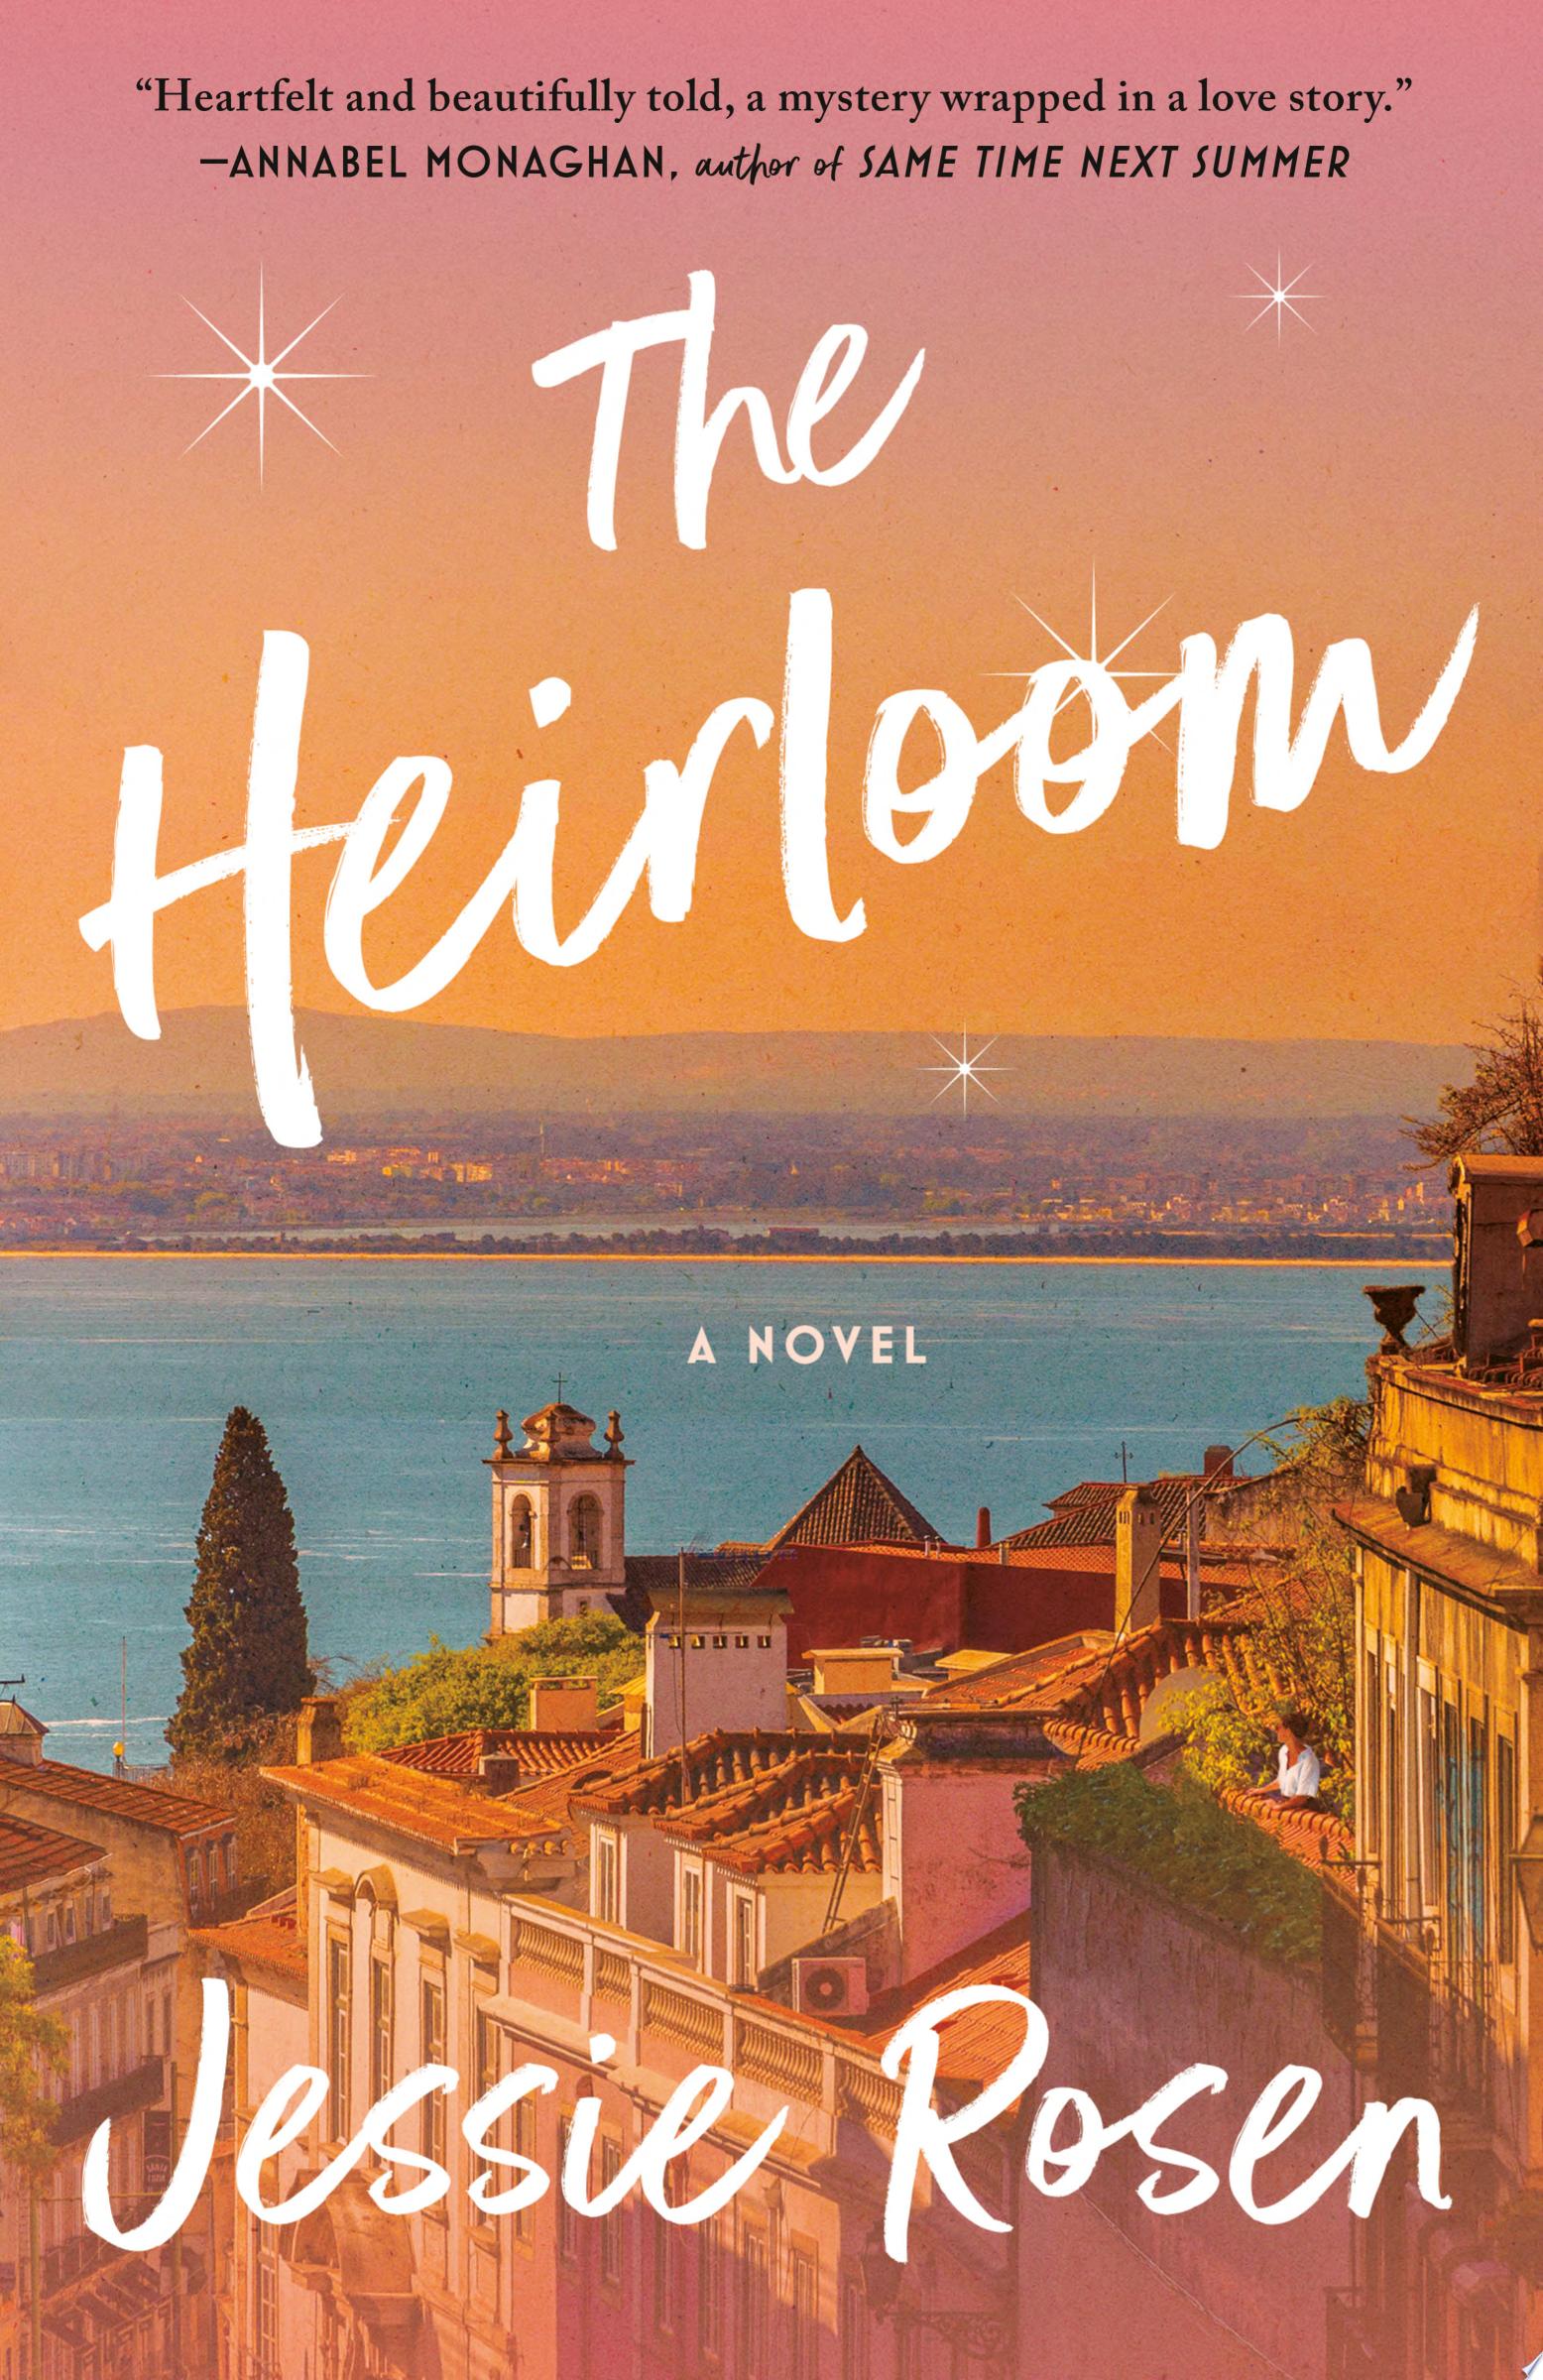 Image for "The Heirloom"